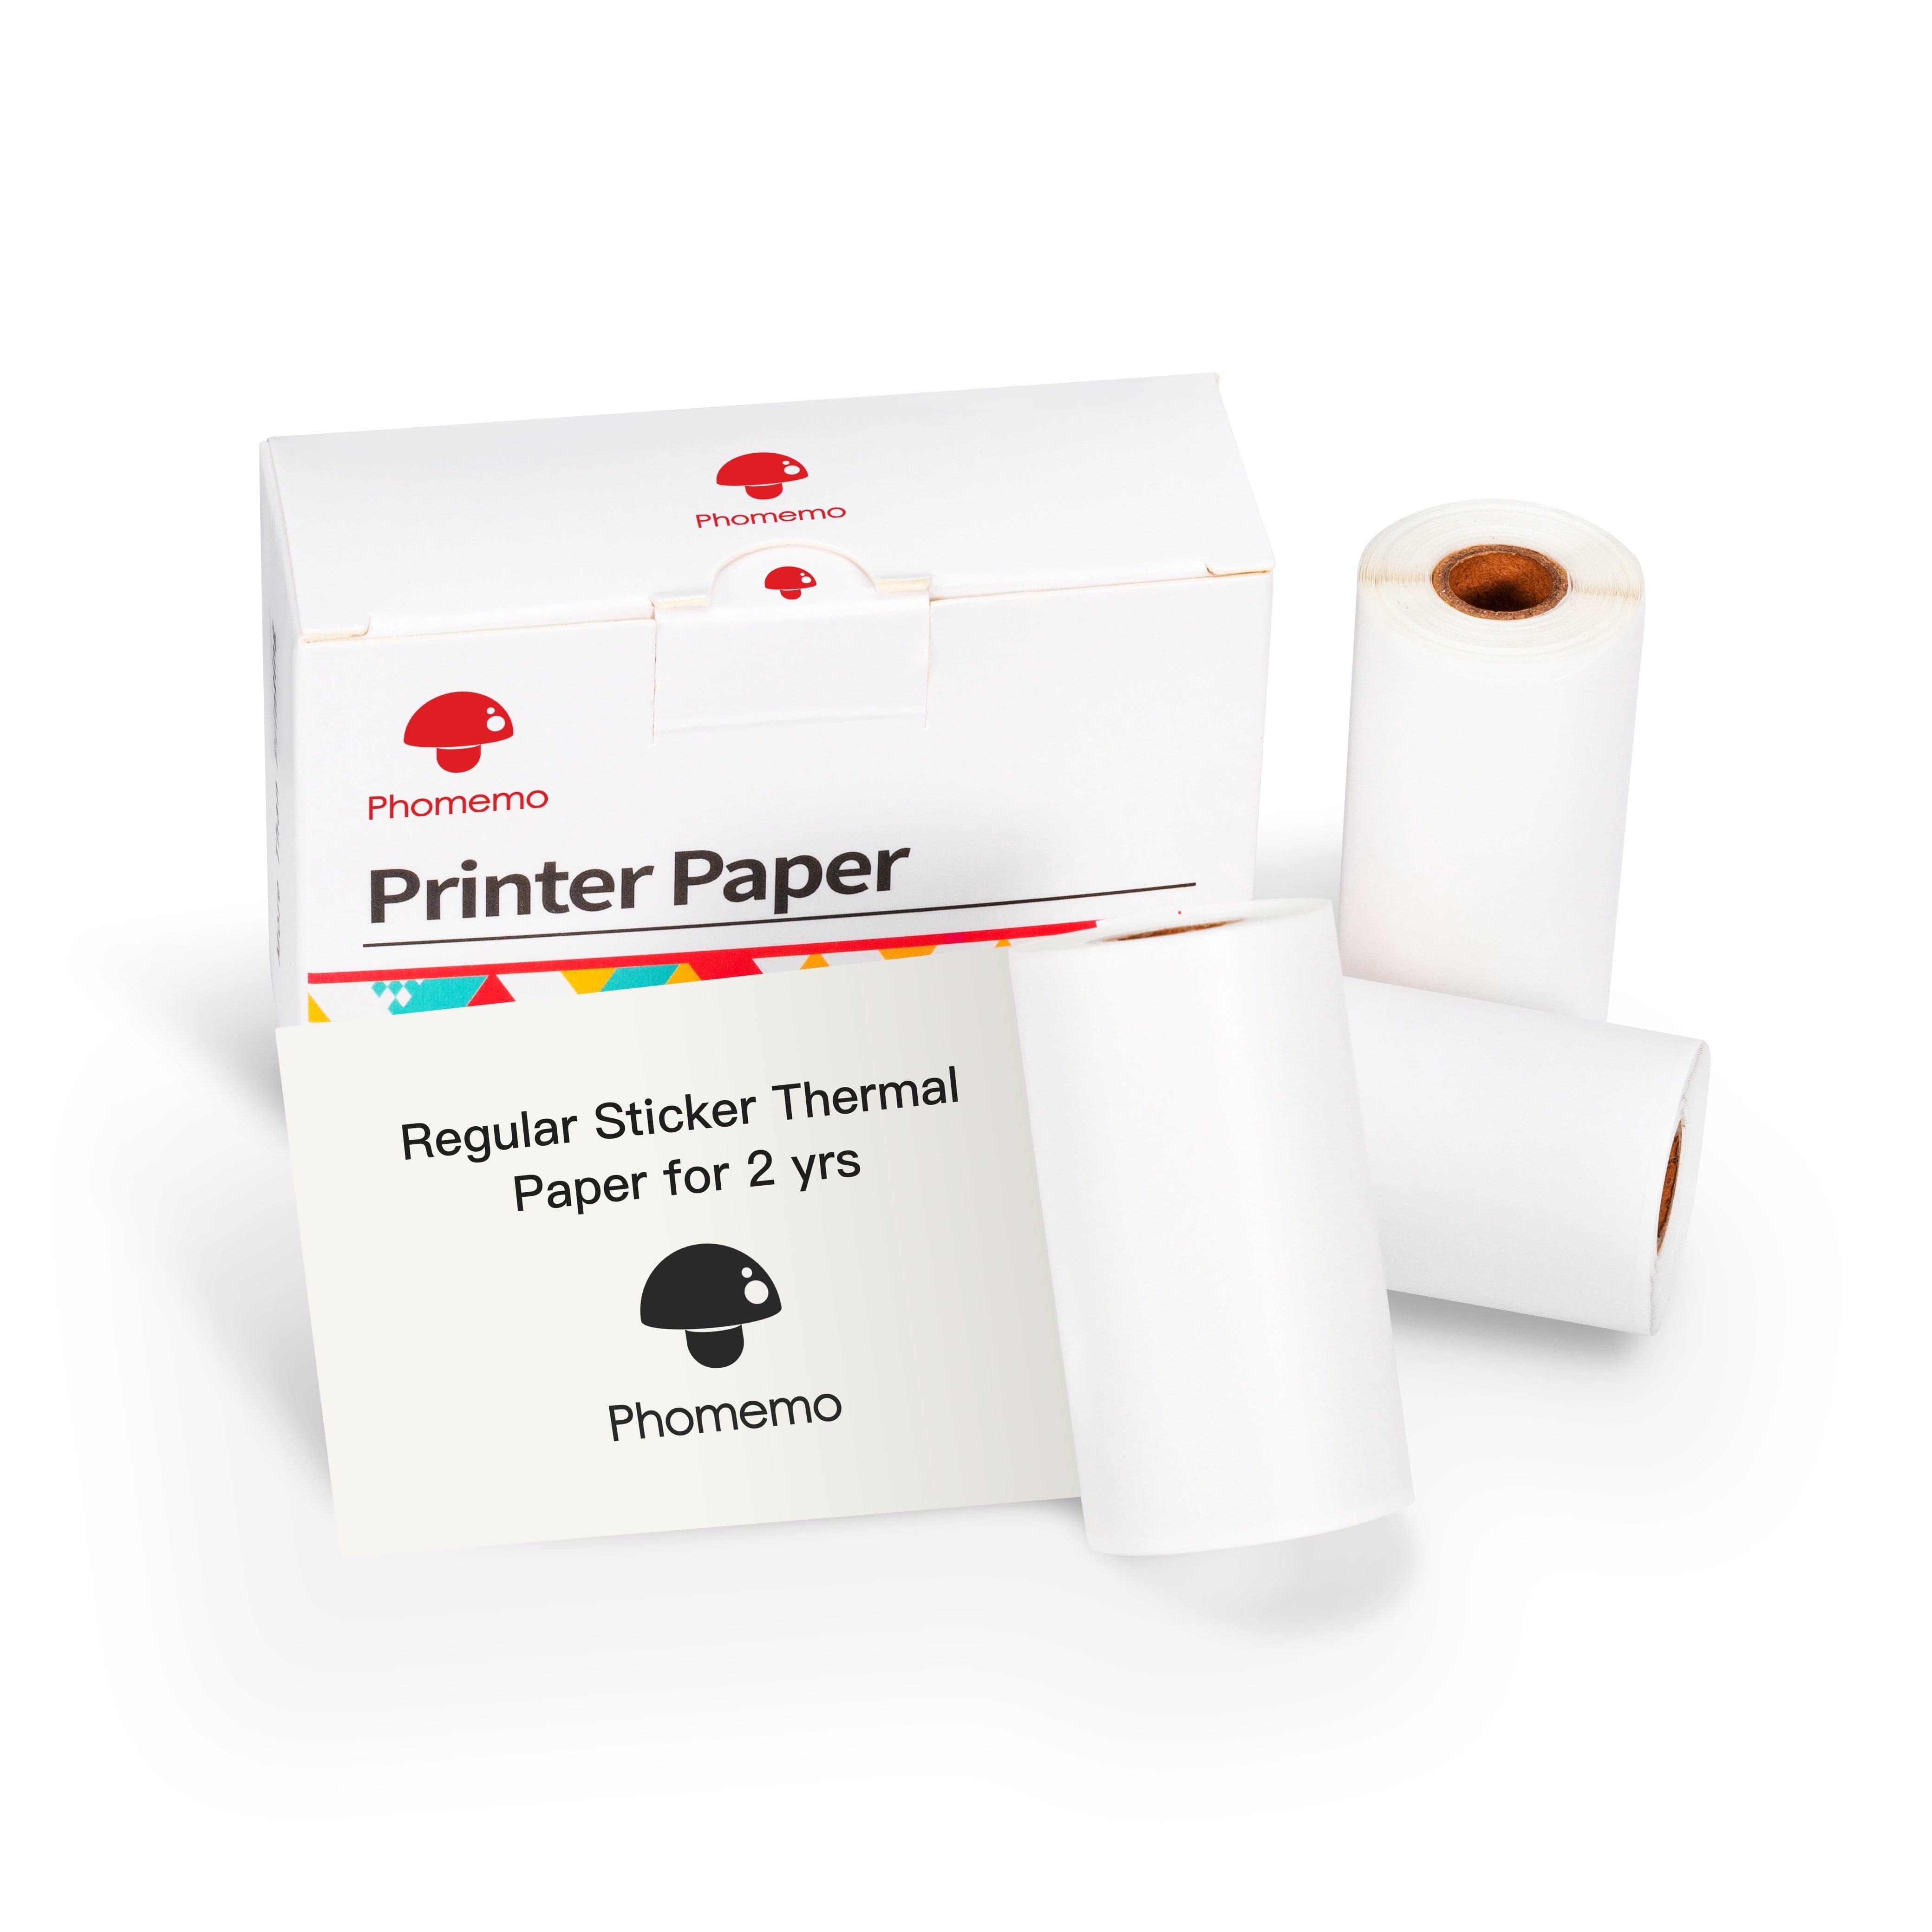 Phomemo Clear Paper for M02 M02 Pro M02S M03, Transparent, Original,  Adhesive, Thermal Printer Paper, Glossy Sticker Paper, for Pocket Printer,  53mm x